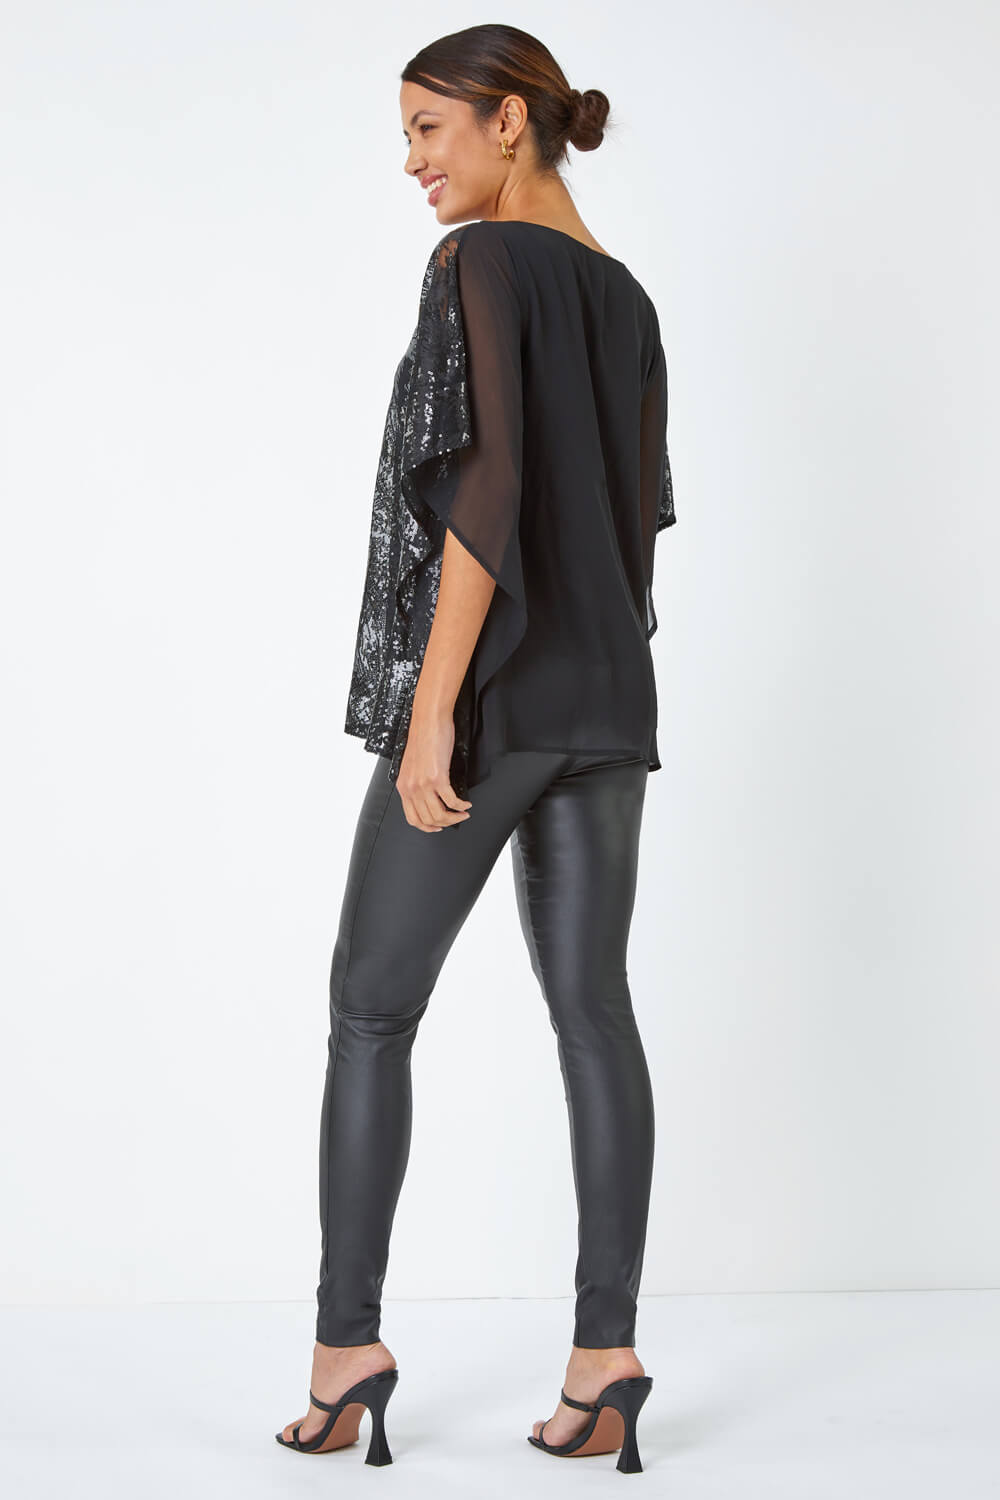 Black Sequin Overlay Stretch Top, Image 3 of 5